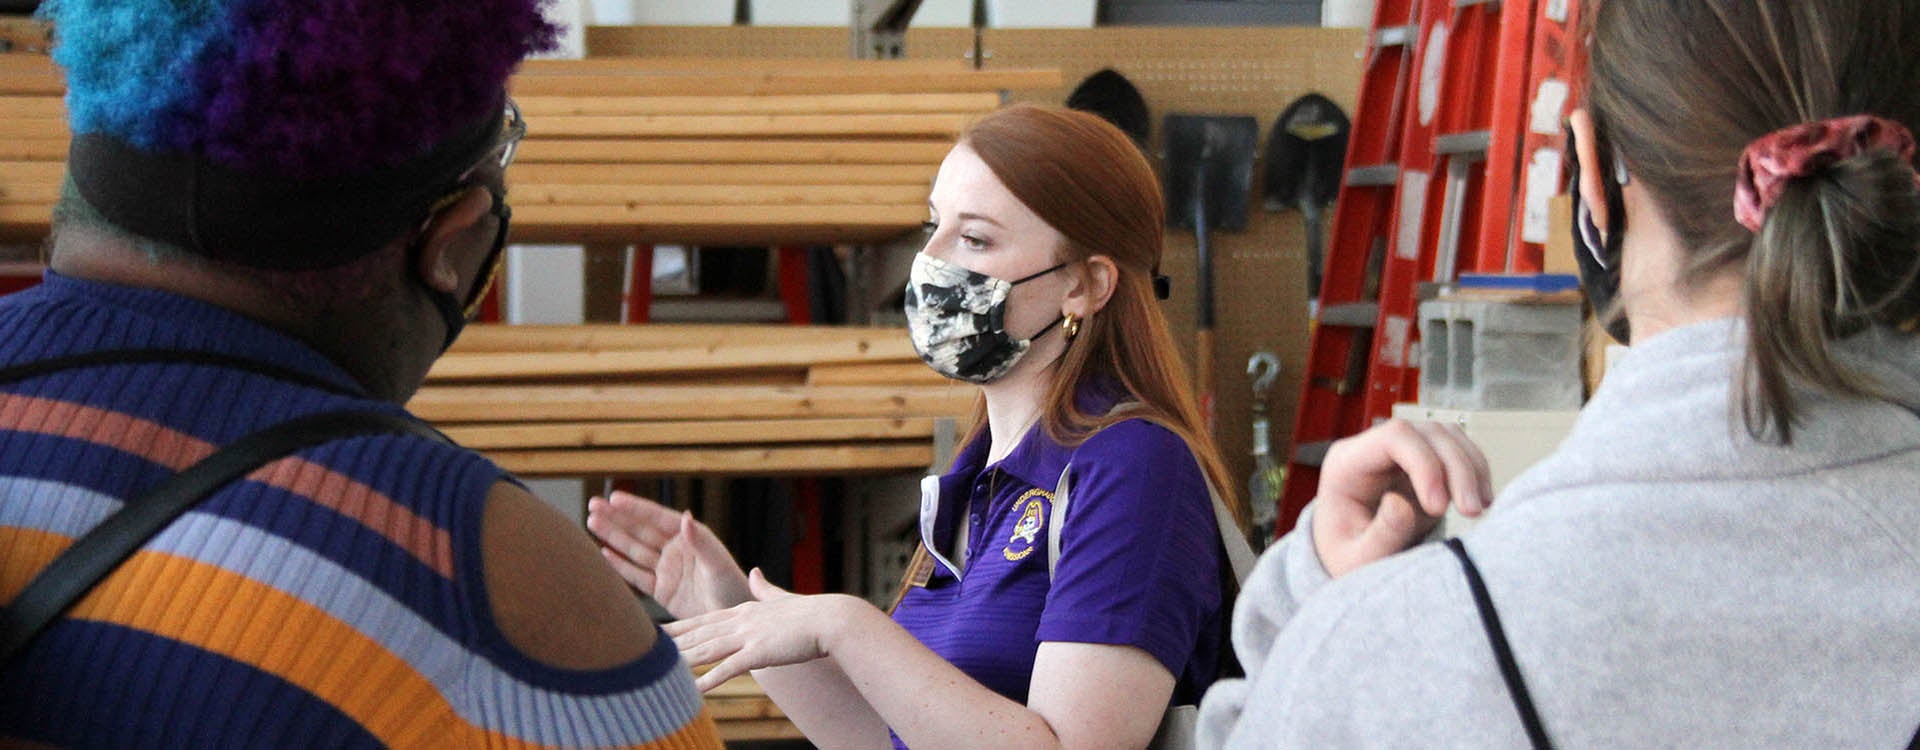 Students receive a tour of the high bay lab in the Science and Technology Building during Pirates Aboard Admitted Students Day for the College of Engineering and Technology on Friday. The college will host another Pirates Aboard event on April 9. (ECU photo by Ken Buday)